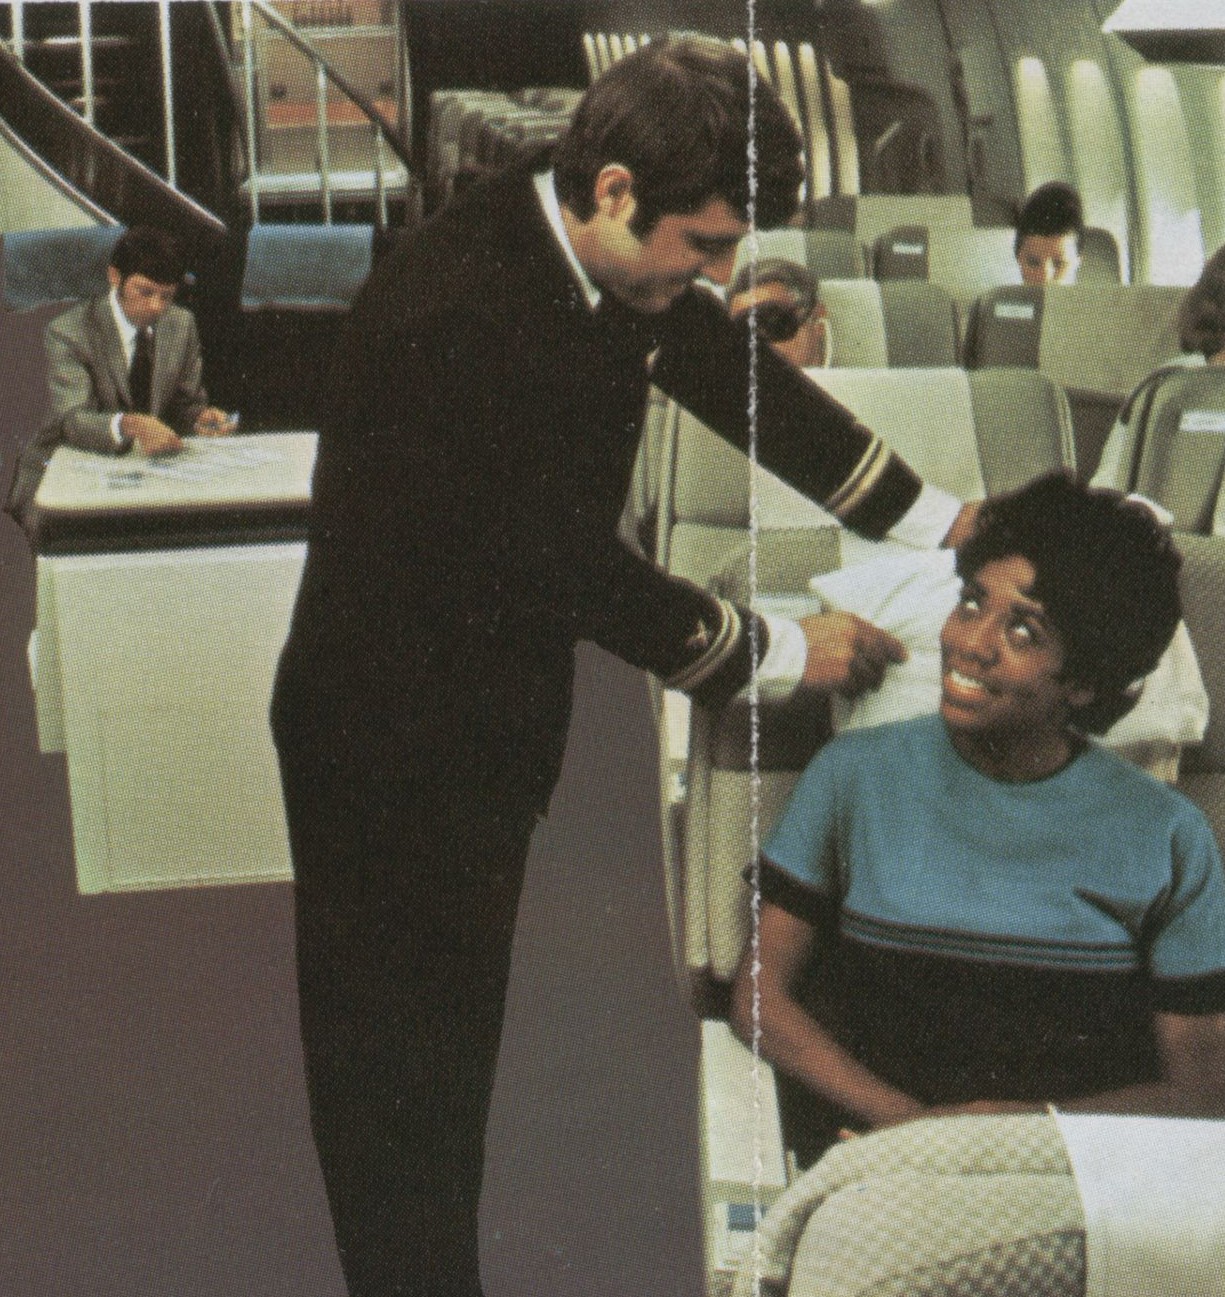 1970s  A Pan Am steward assists a customer in the First Class cabin of a Boeing 747.